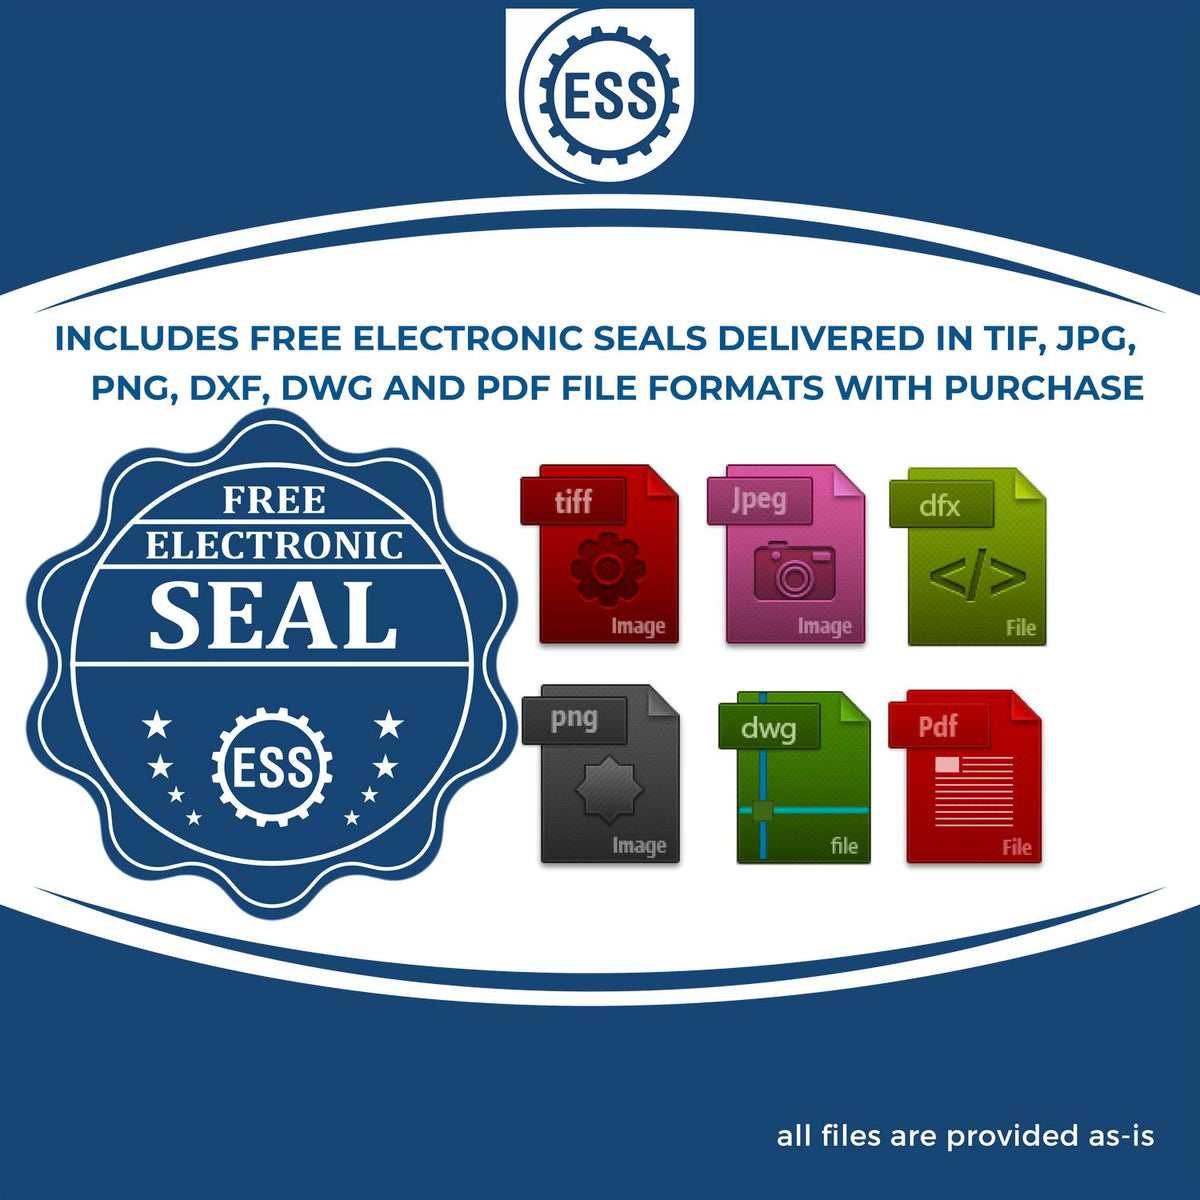 An infographic for the free electronic seal for the Slim Pre-Inked State Seal Notary Stamp for Montana illustrating the different file type icons such as DXF, DWG, TIF, JPG and PNG.